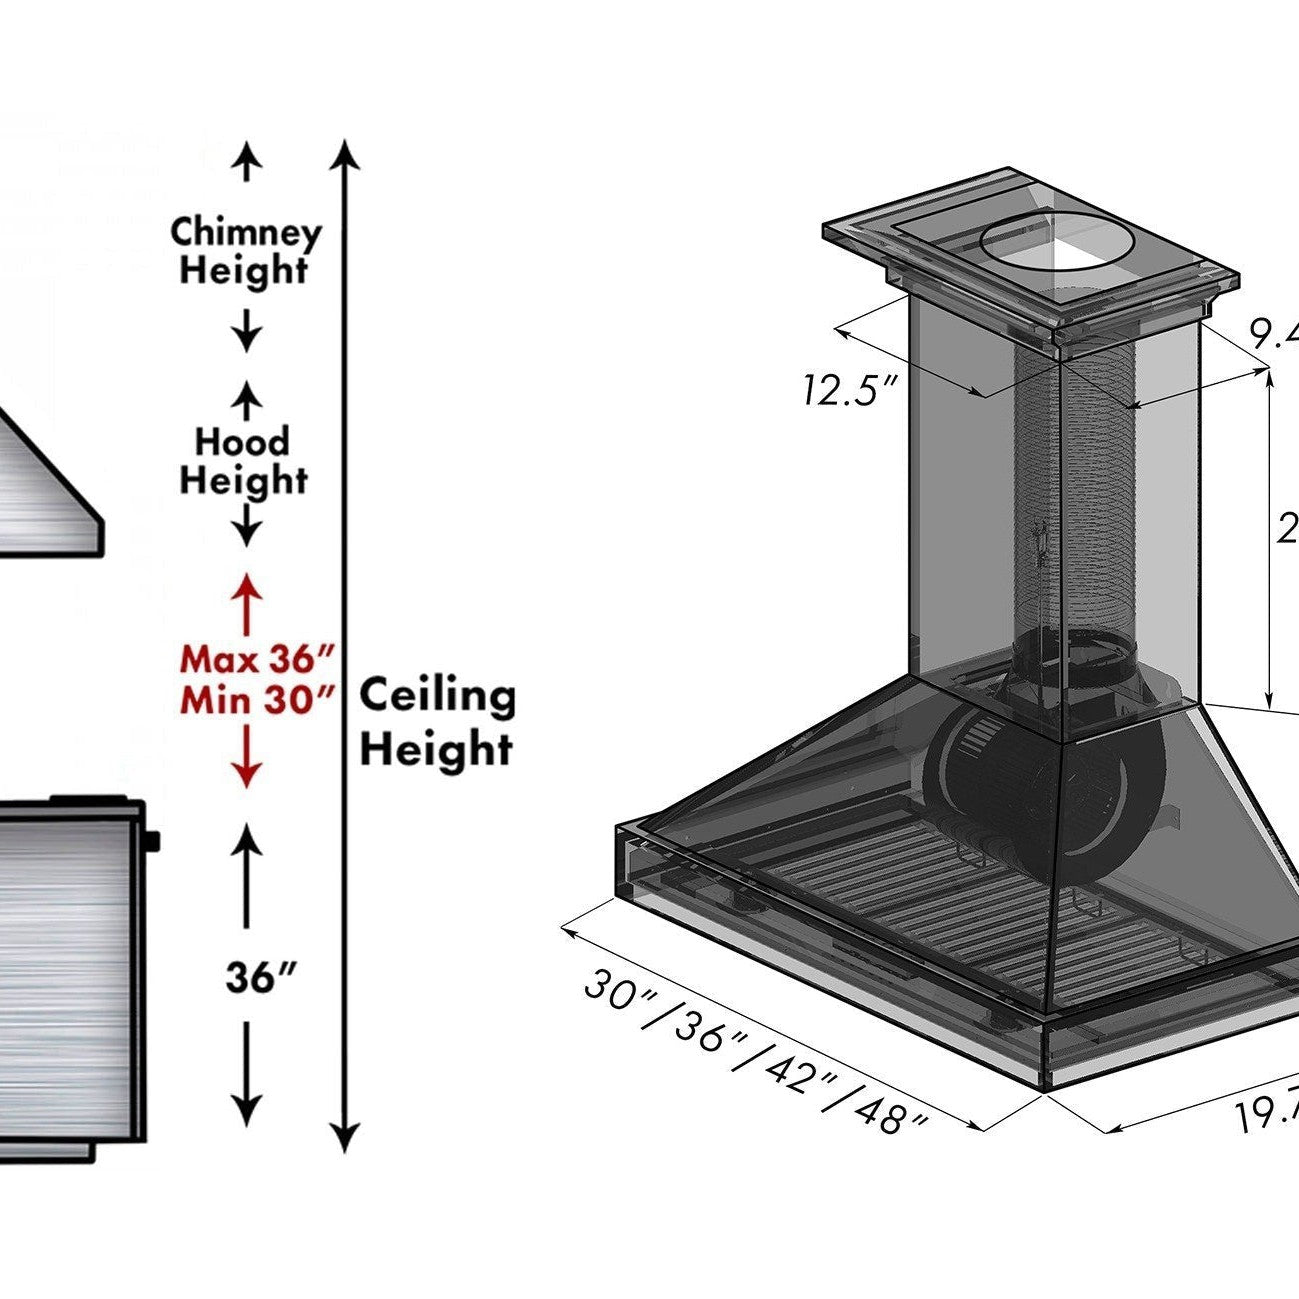 ZLINE Ducted Unfinished Wooden Wall Mount Range Hood (KBUF) Dimensions and Chimney Height Guide